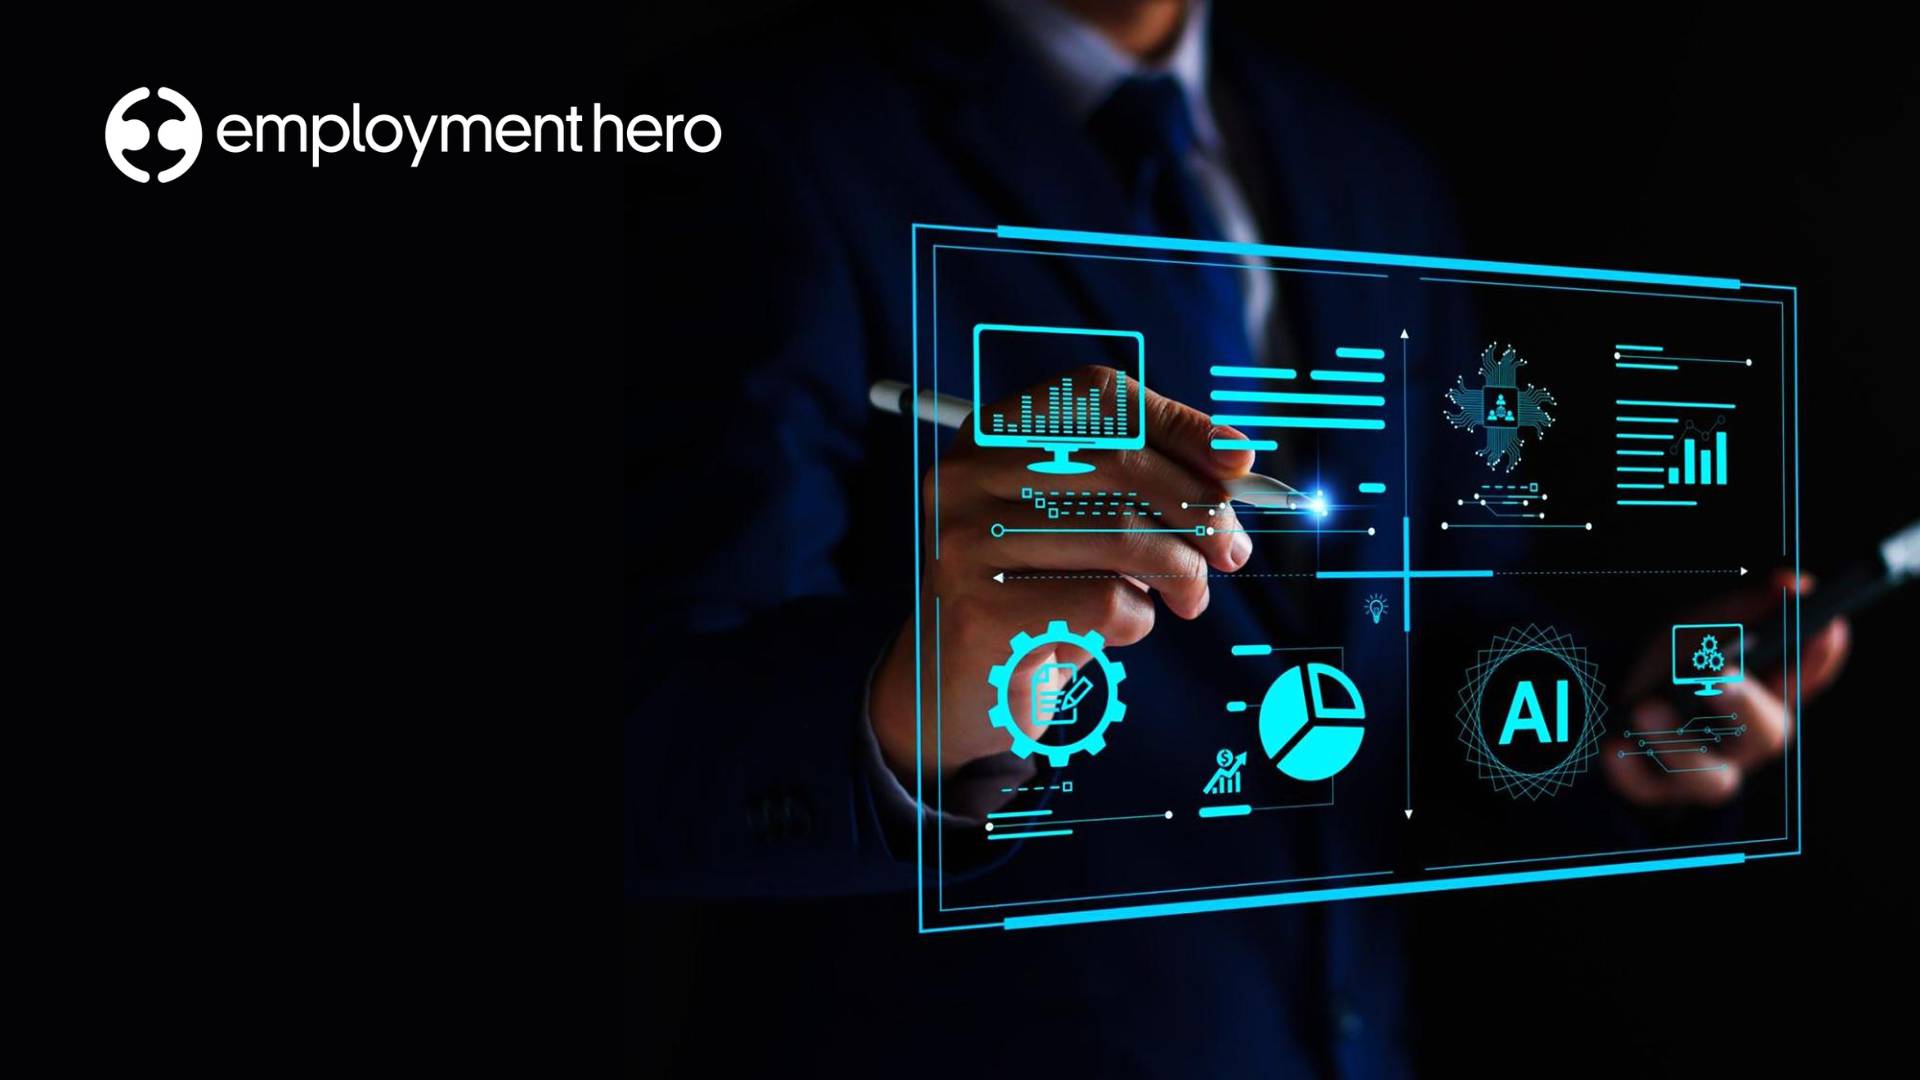 Employment Hero Revolutionizes SMEs with AI Integration Across Core Functions